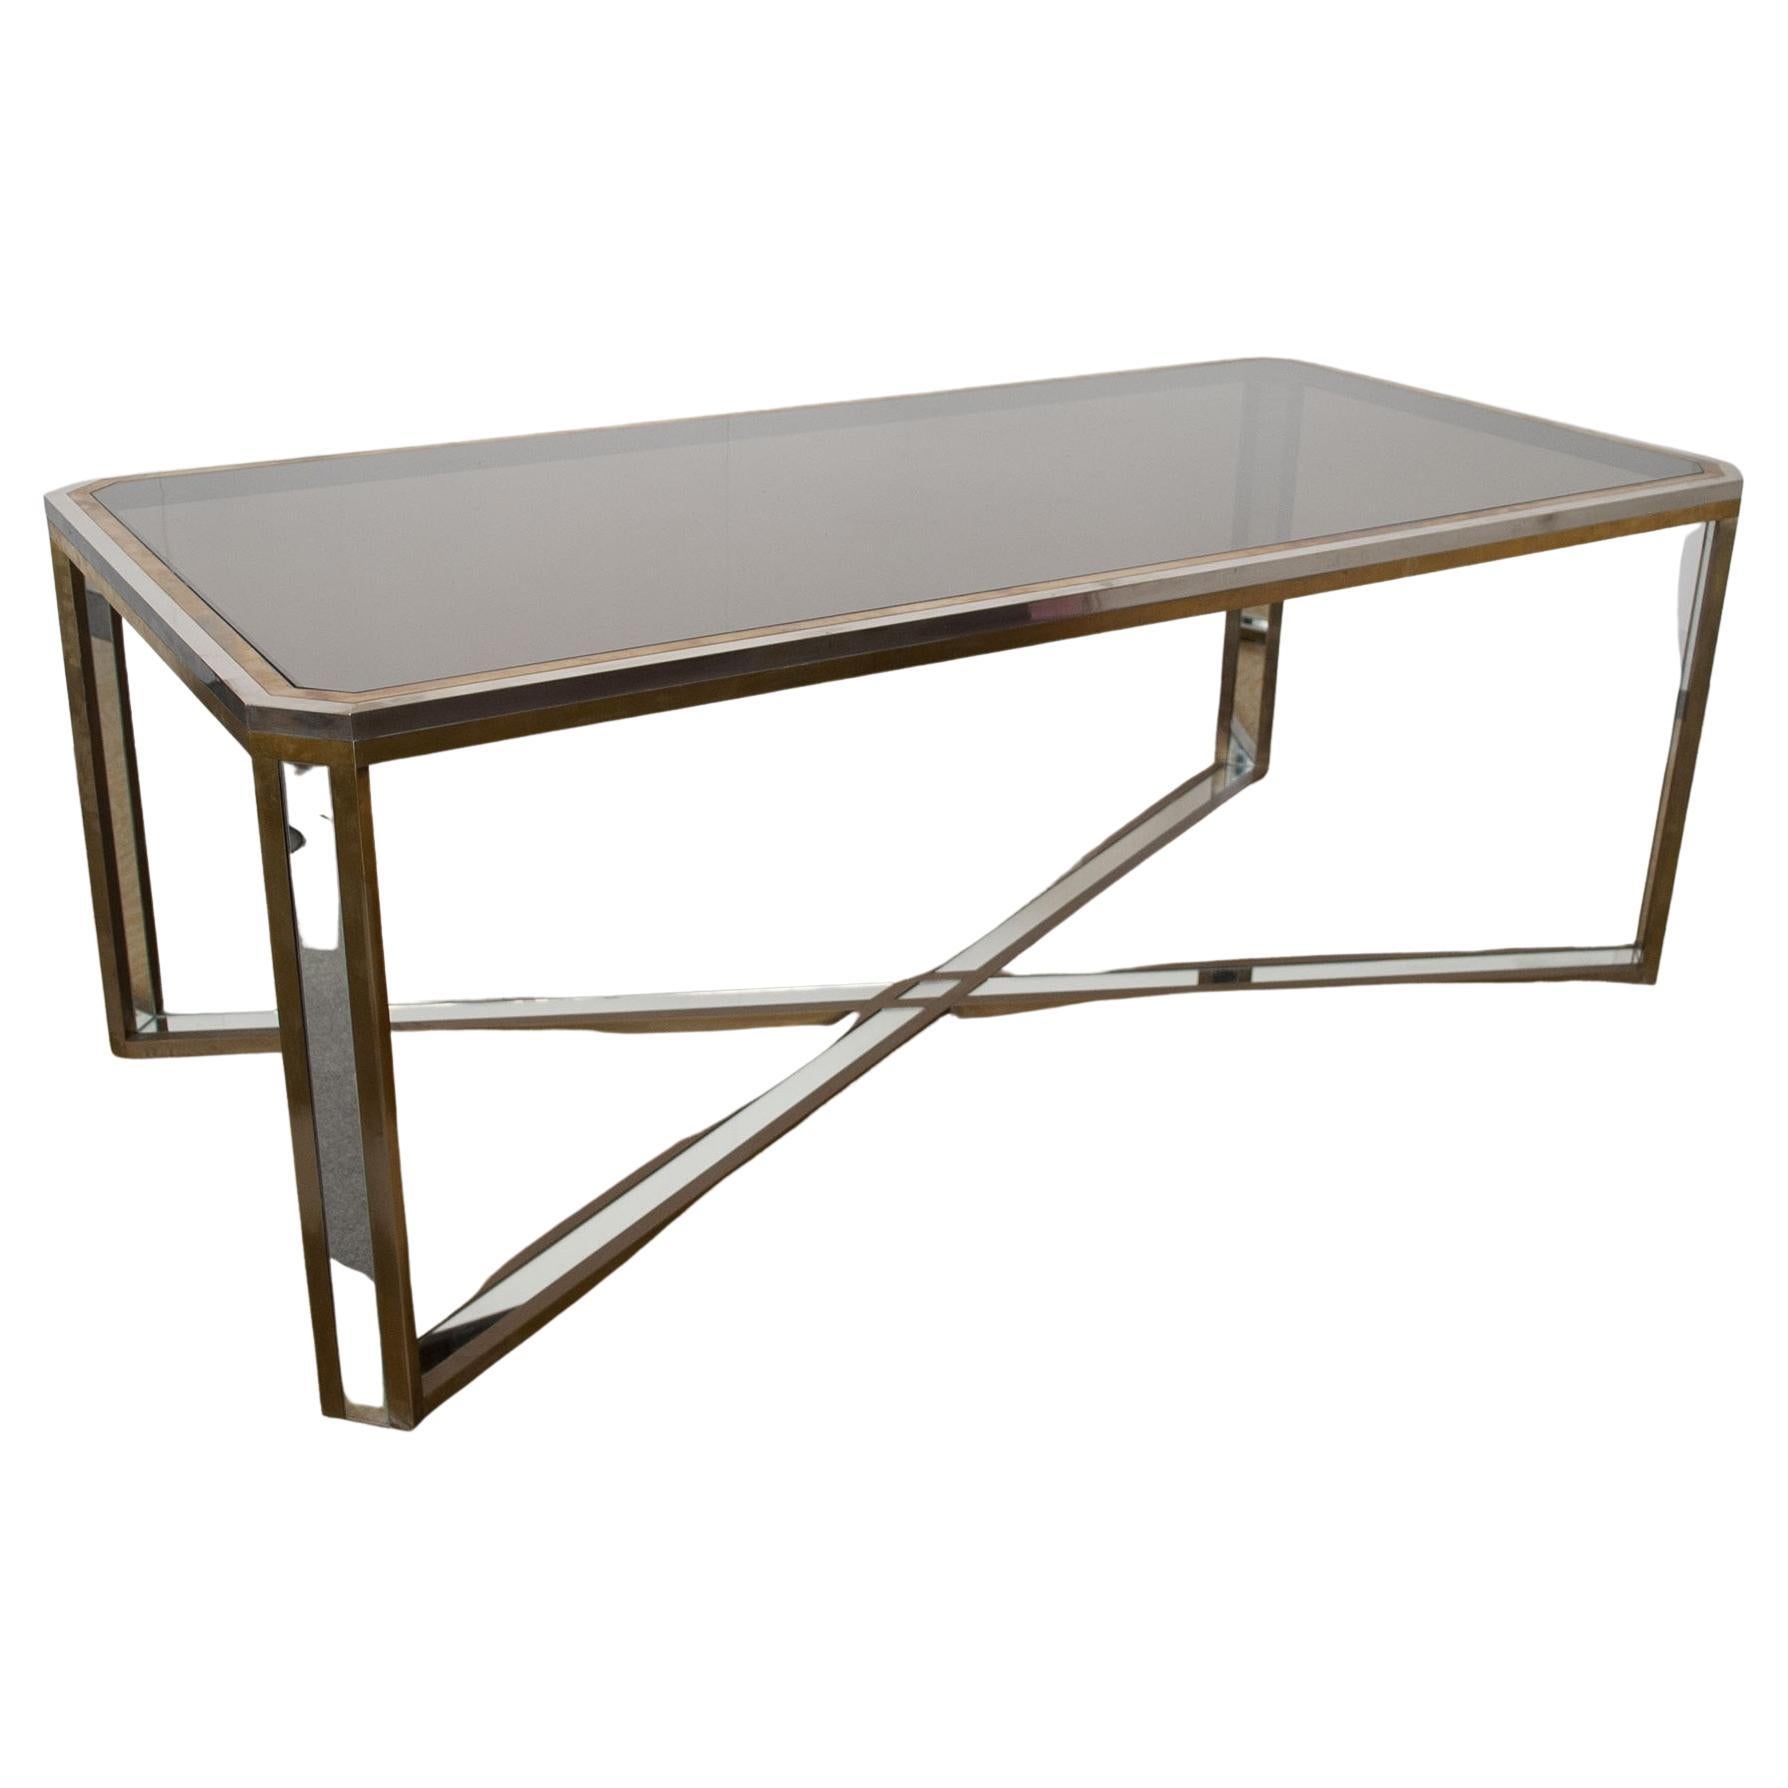 This spectacular table, designed by Romeo Rega, is made of steel, brass and mirrored glass.

Rega’s furniture is characterized by geometric shapes and reduced forms. His designs are almost always gilded, chromed, or brass-plated, which adds the